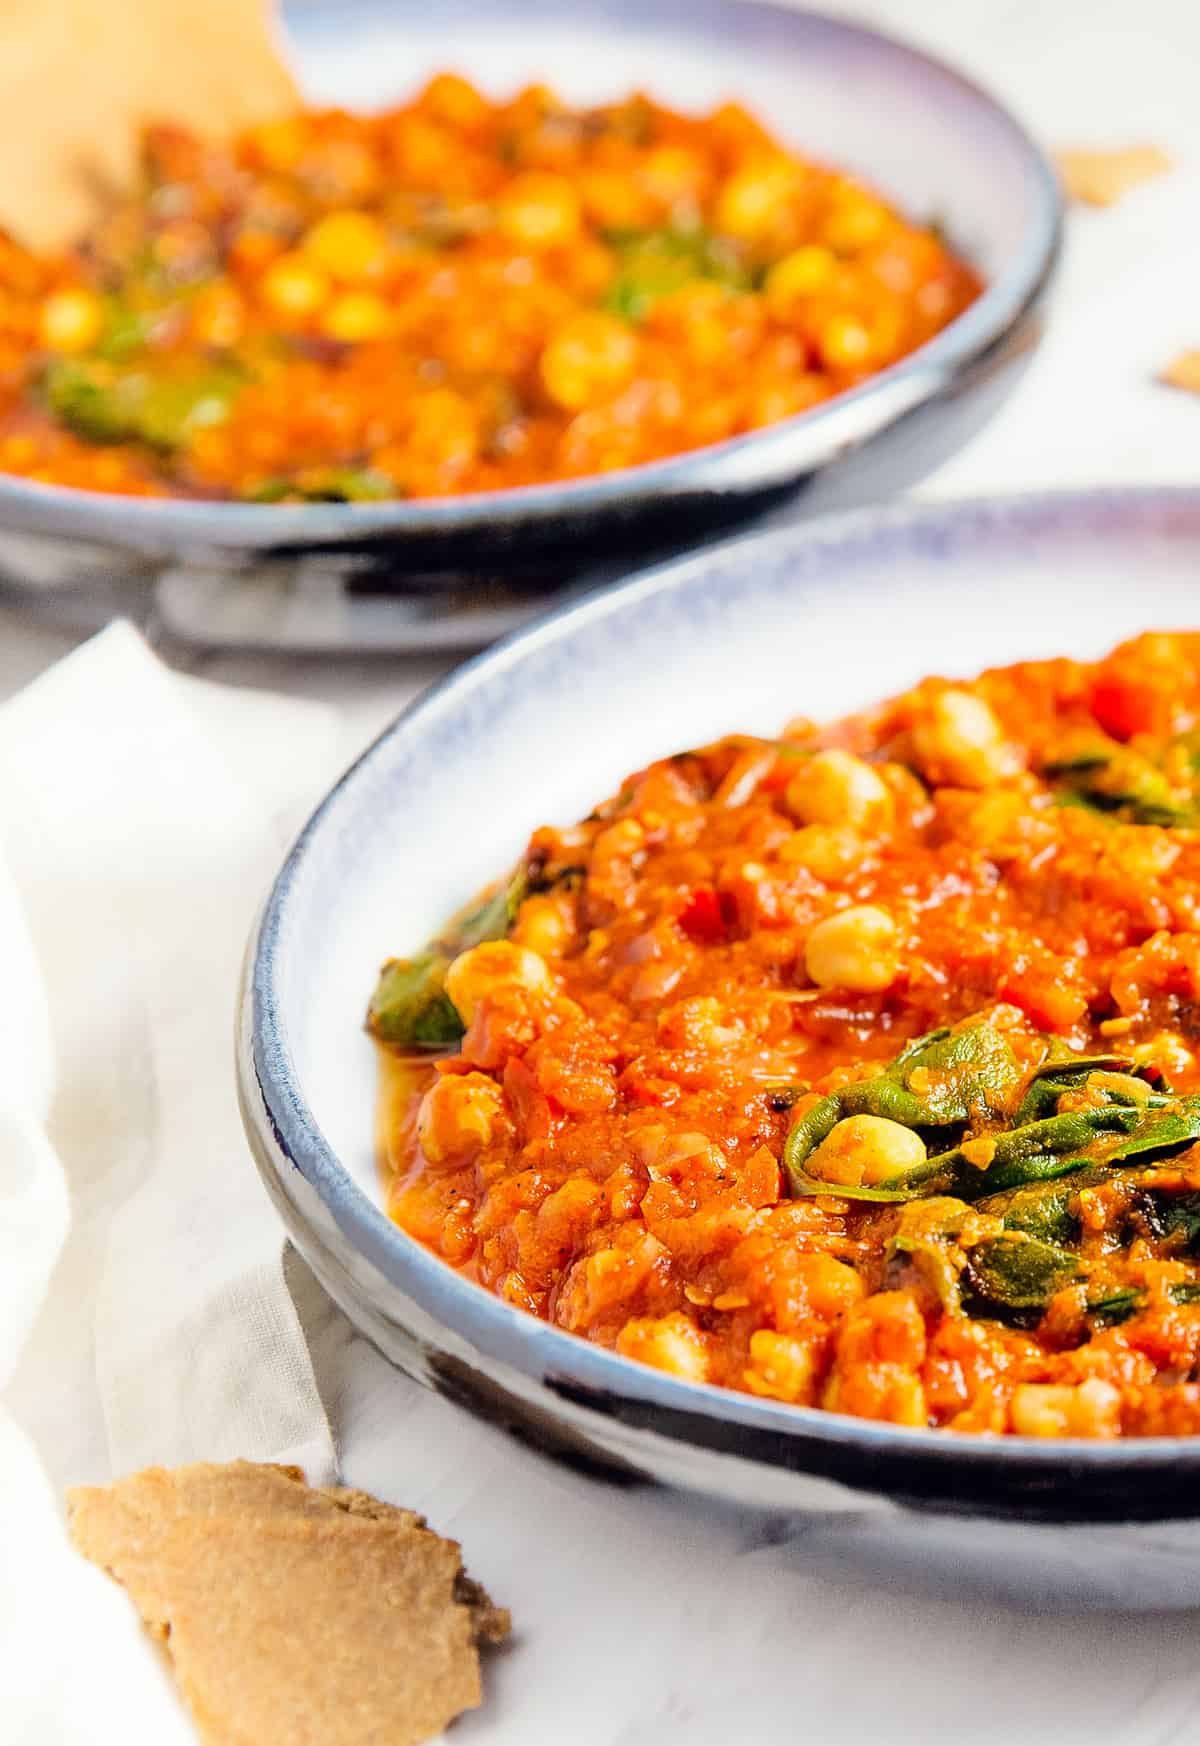 Spicy Berbere Bean Soup, plant based, vegan, vegetarian, whole food plant based, gluten free, recipe, wfpb, healthy, healthy vegan, oil free, no refined sugar, no oil, refined sugar free, dairy free, dinner party, entertaining, soup